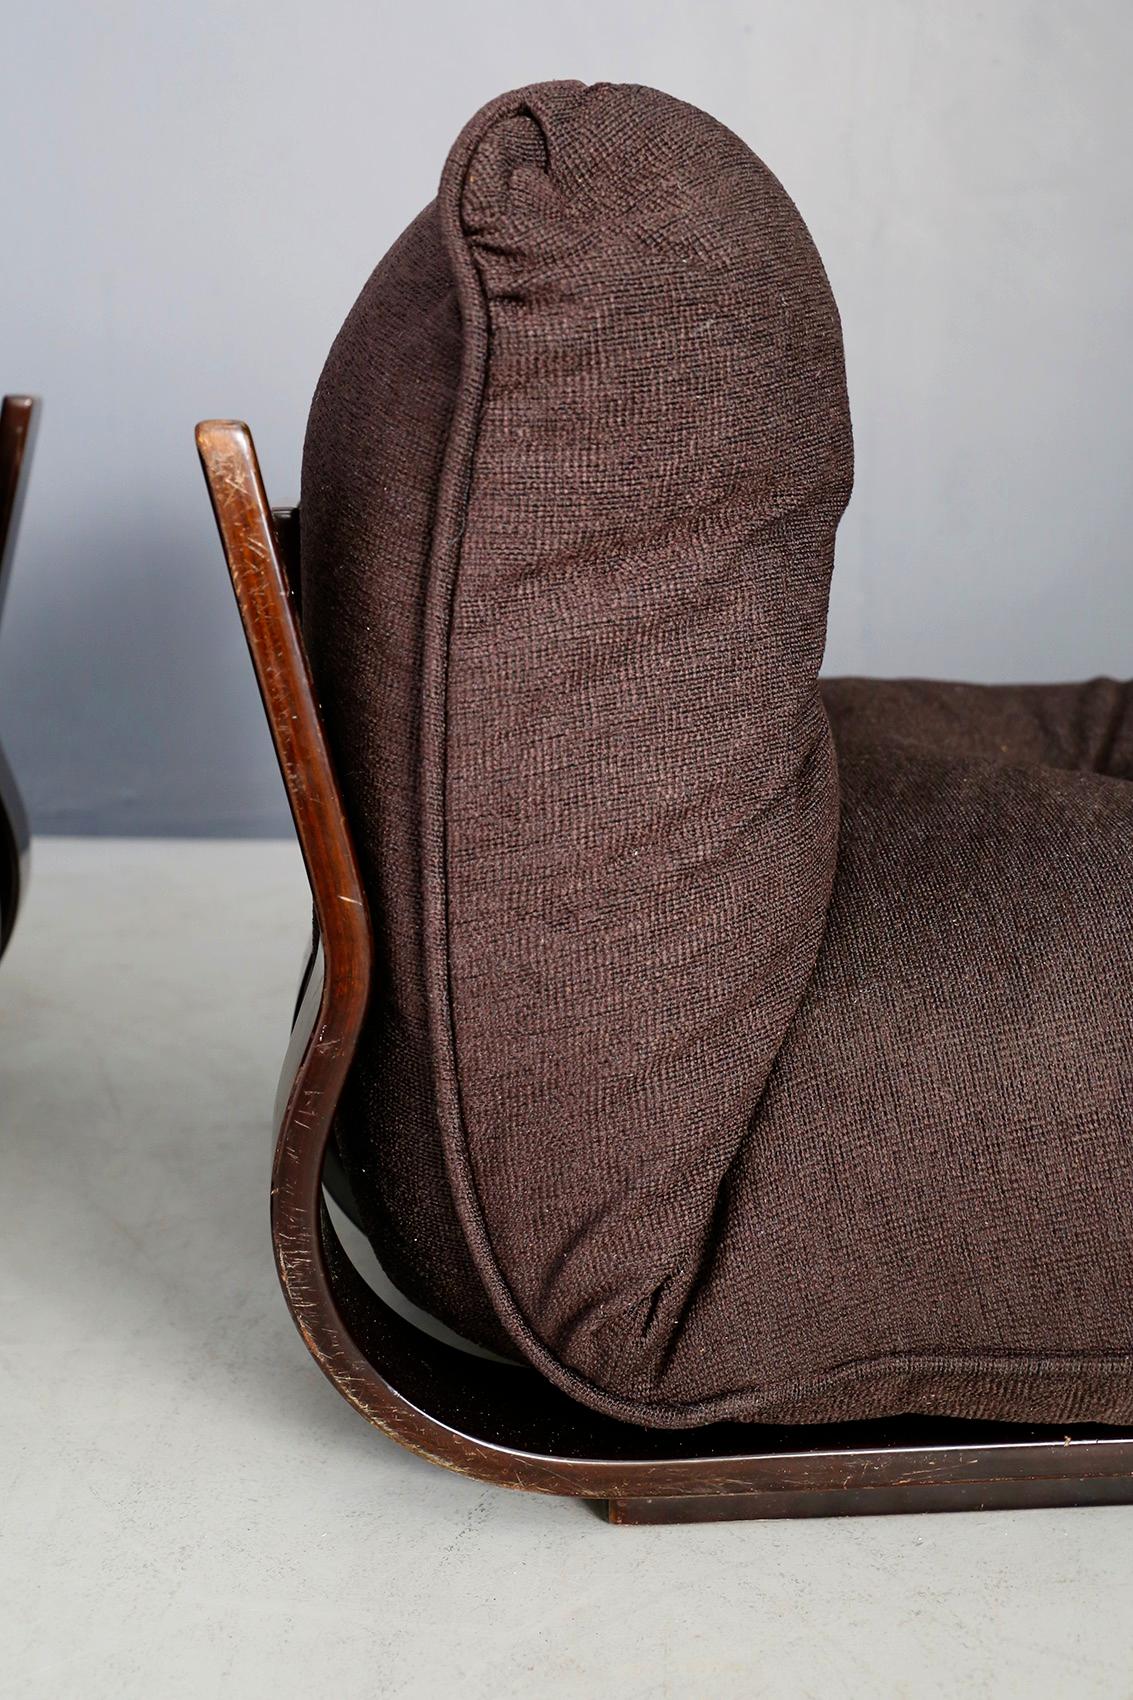 Pair of armchairs from the 1970s of Frigerio. The armchairs have been re-lined in chestnut-coloured Italian cotton fabric. The peculiarity of the cushions are its large round buttons that give an aesthetic of modernity to the seat. Its structure is